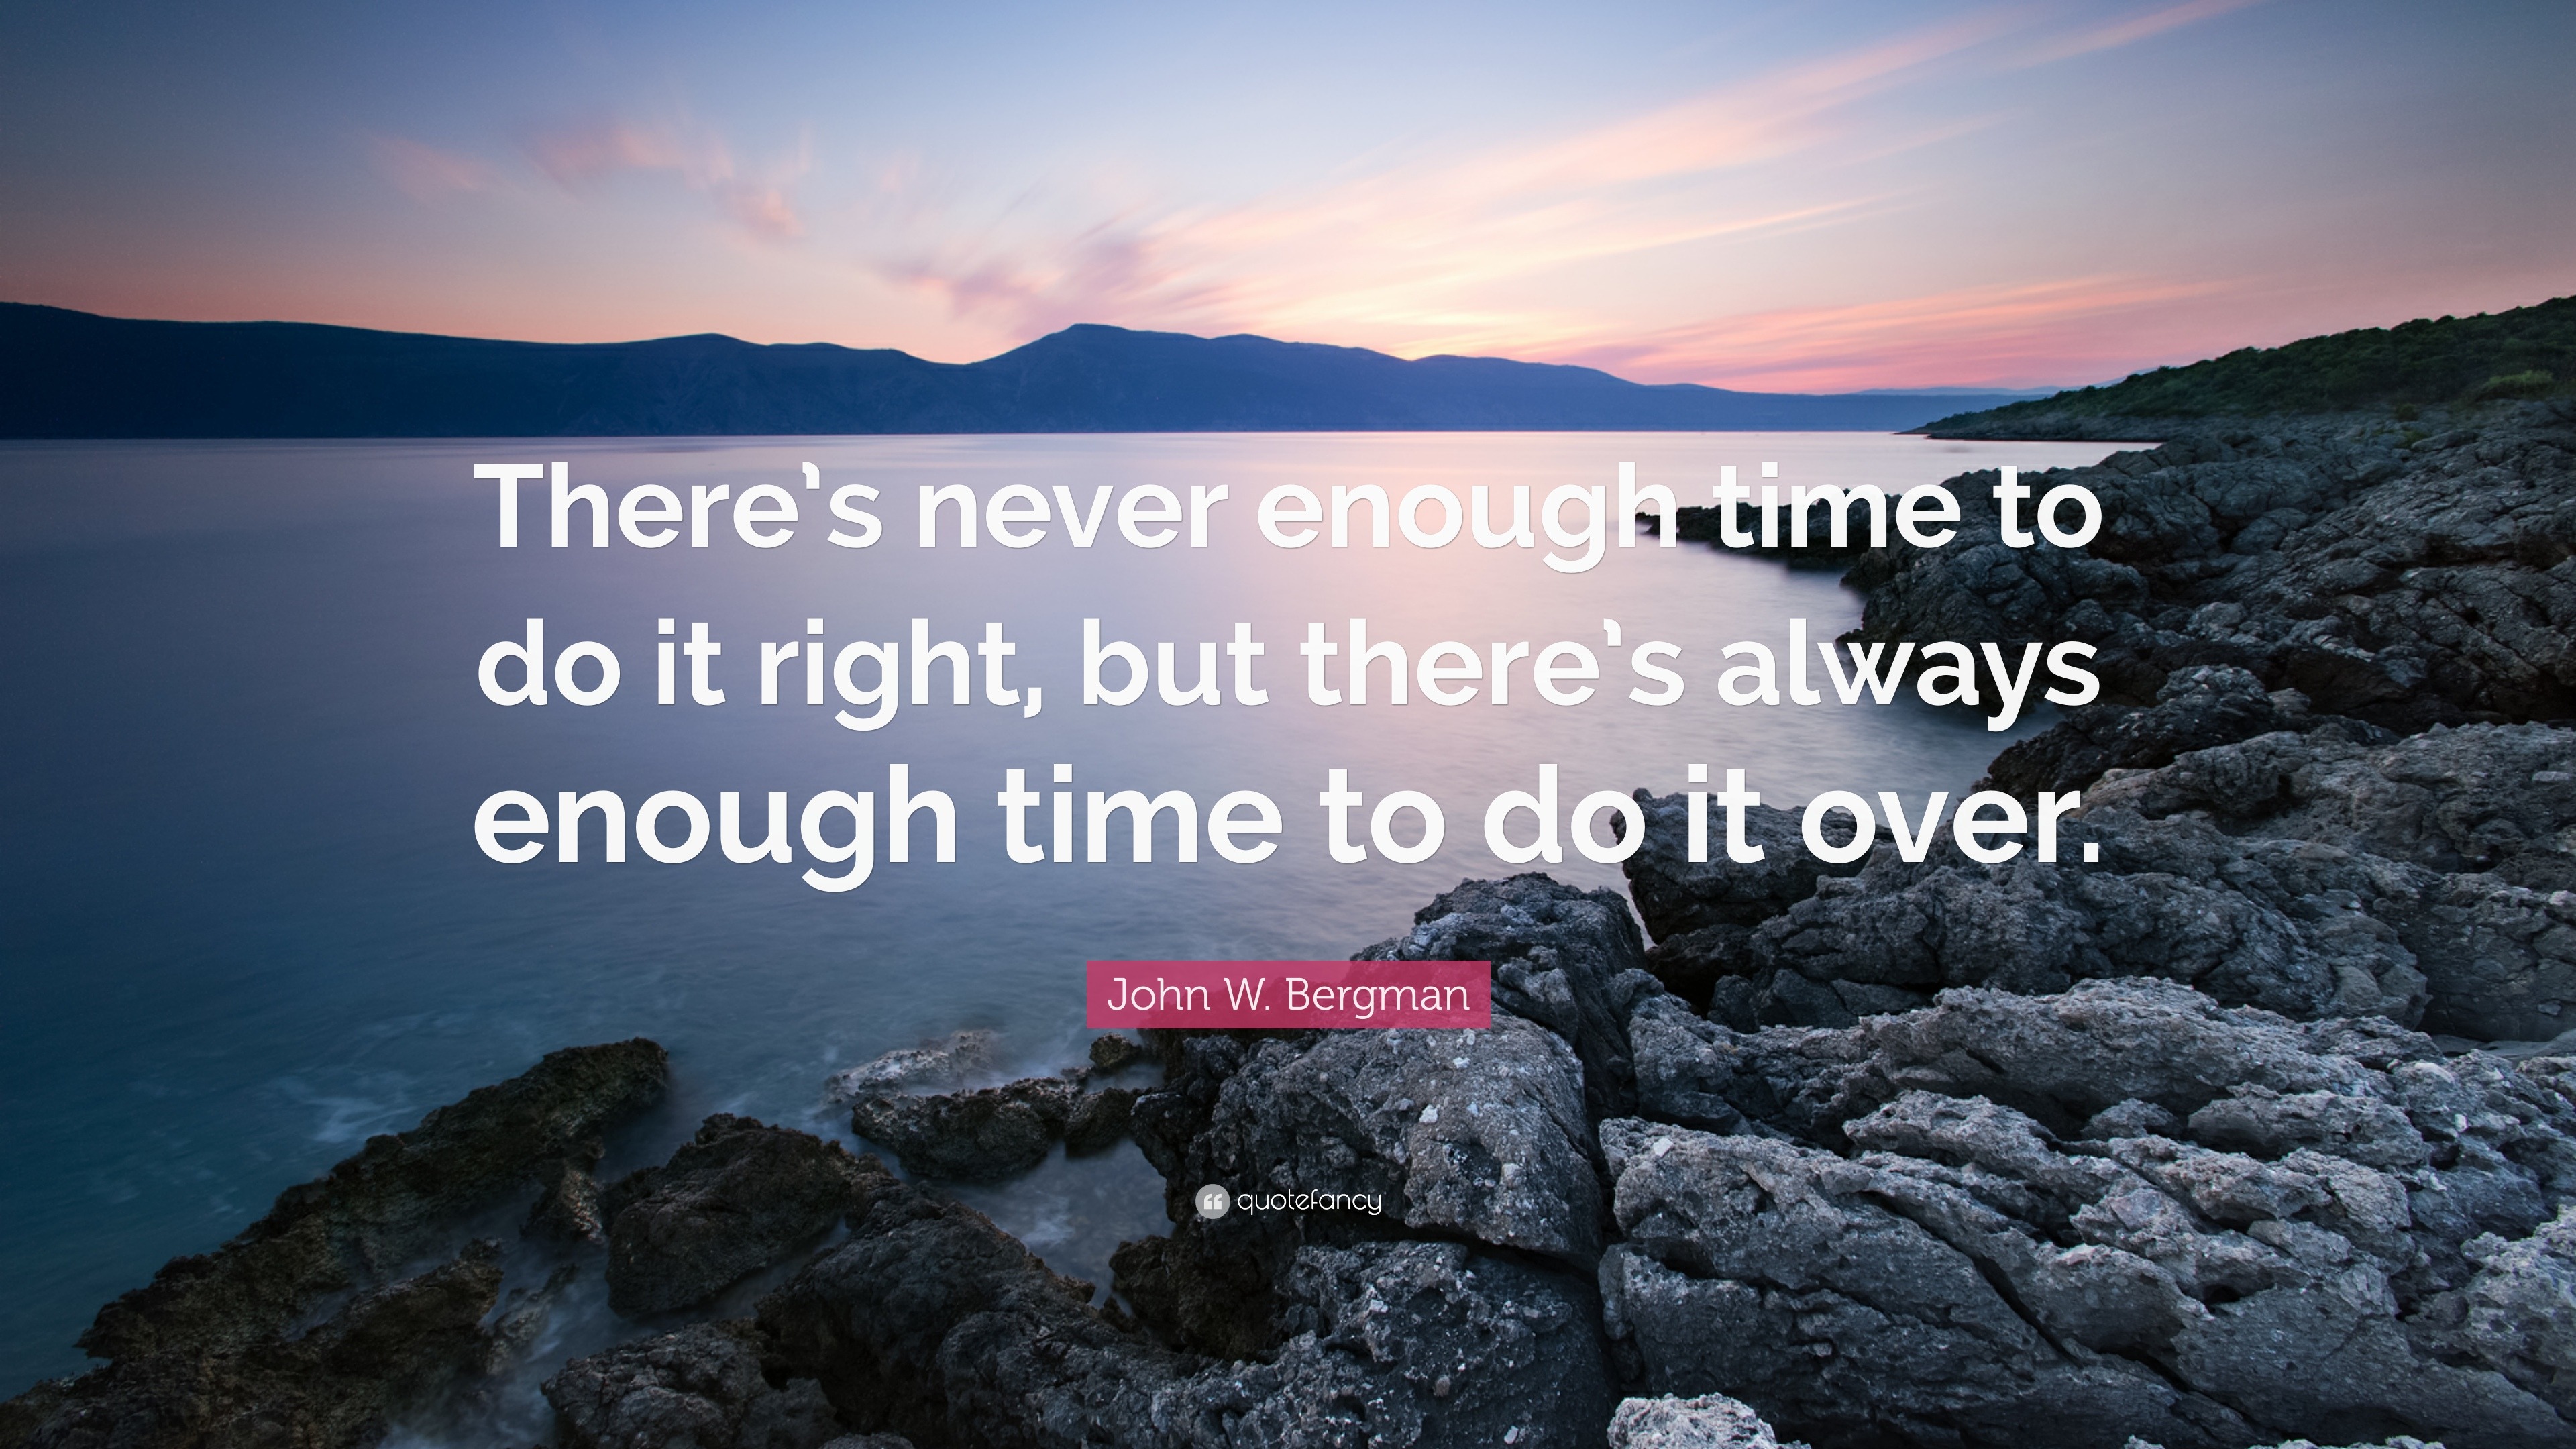 John W. Bergman Quote: “There’s never enough time to do it right, but